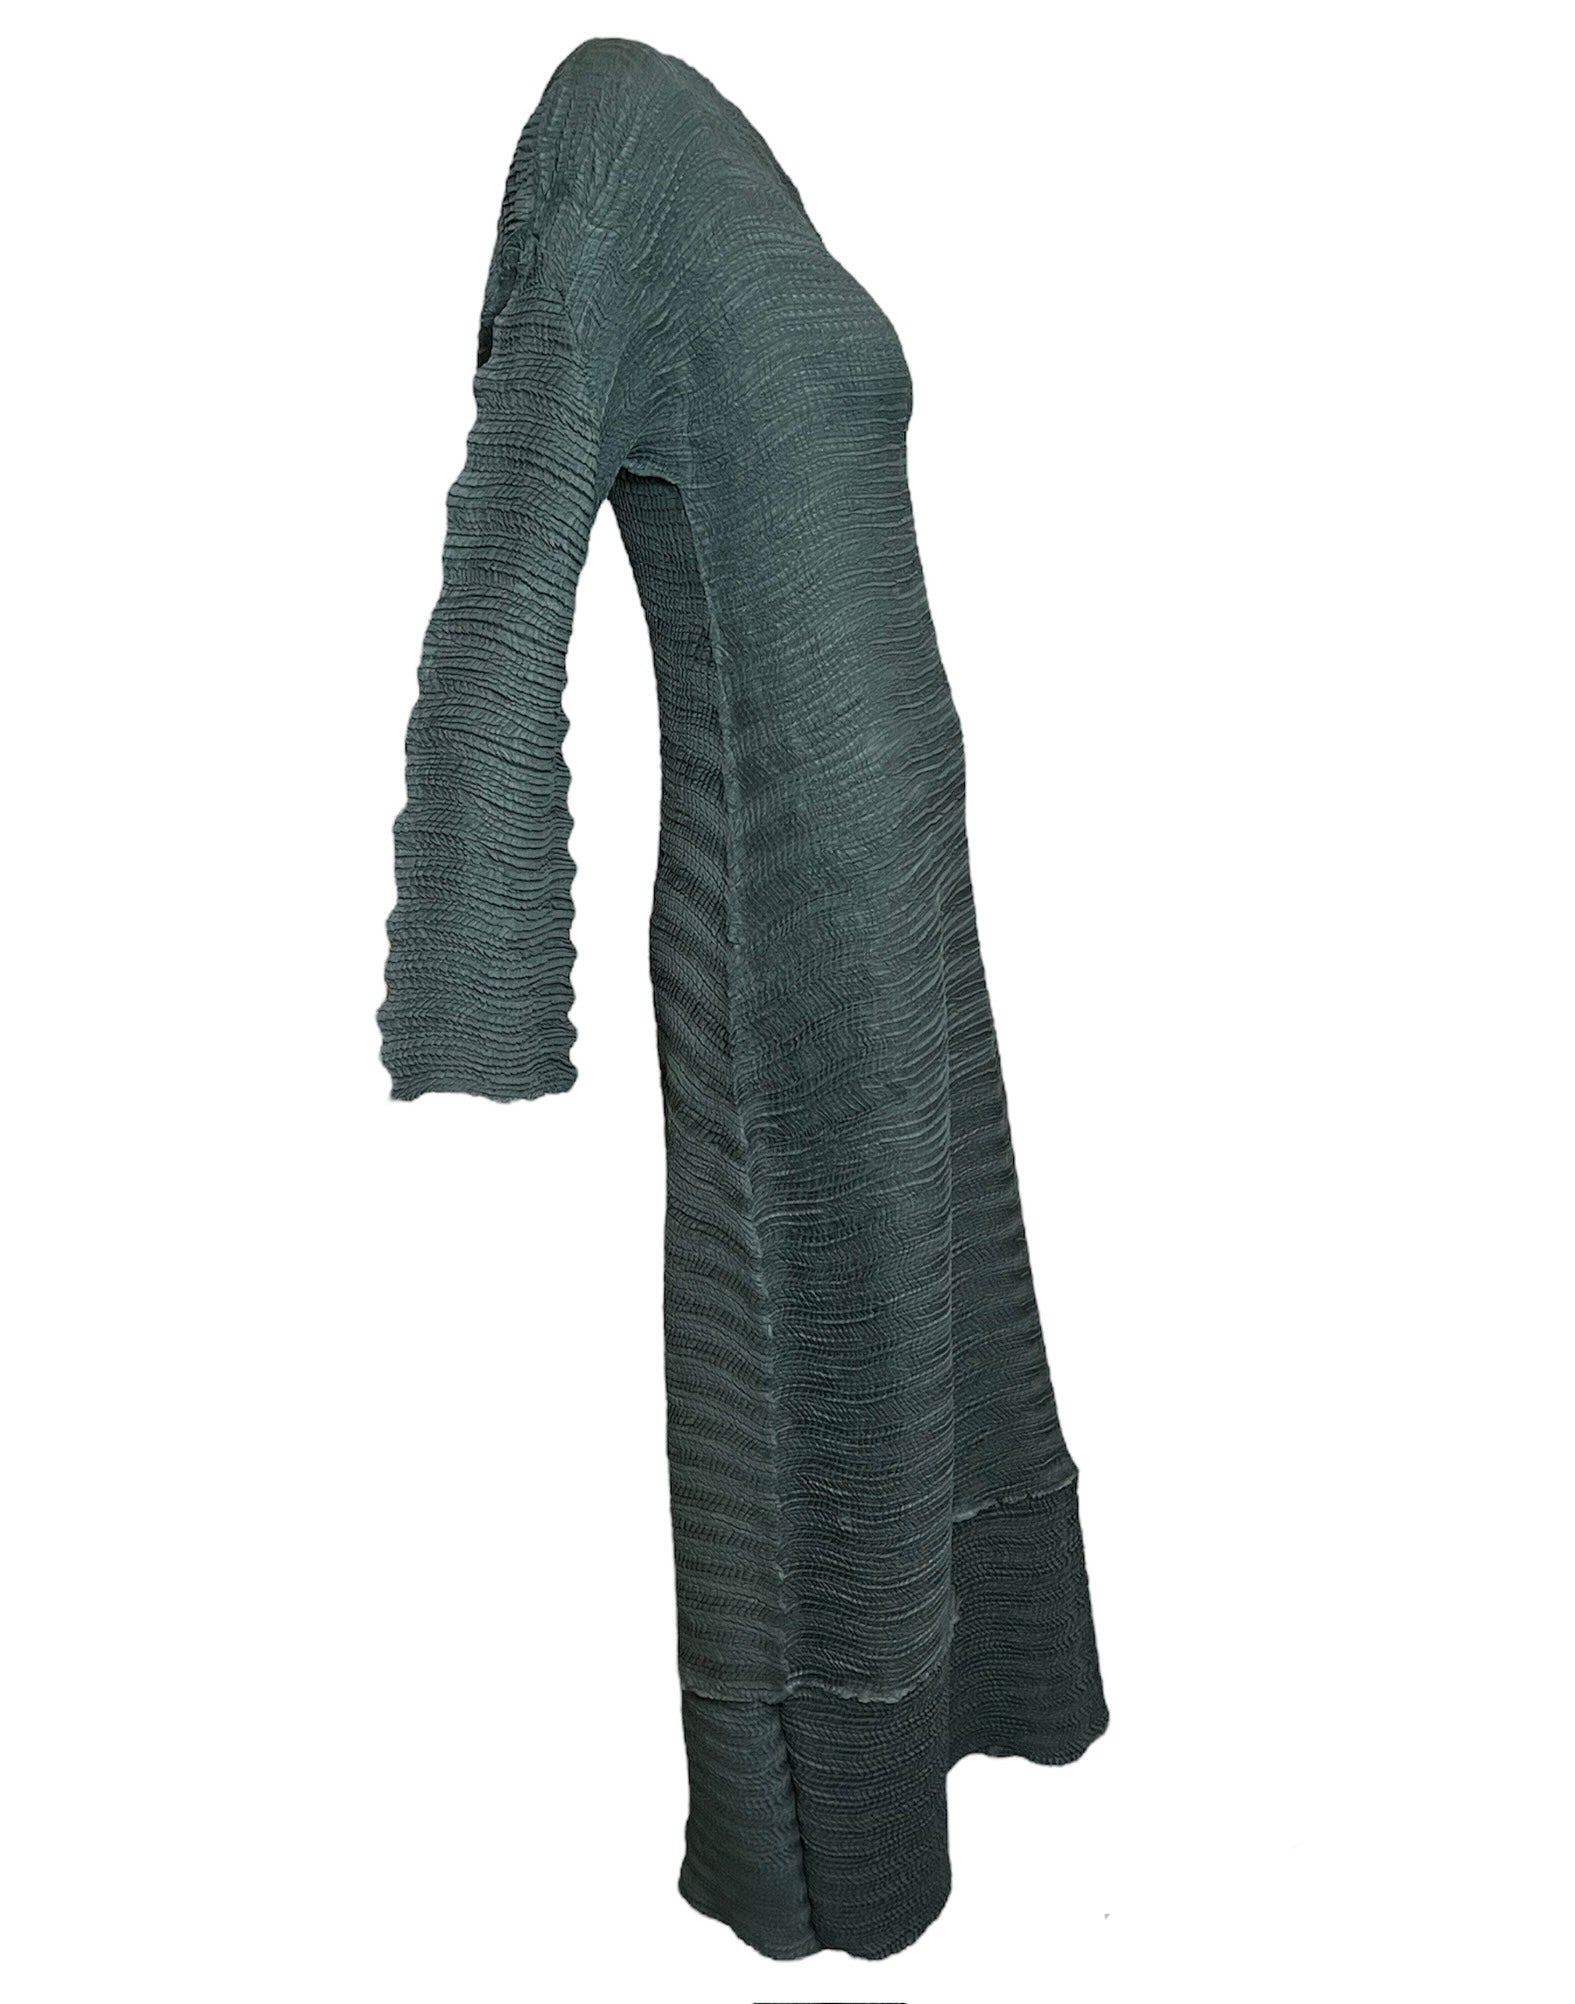 Issey Miyake Olive Green Pleated Maxi Dress SIDE 2 of 5